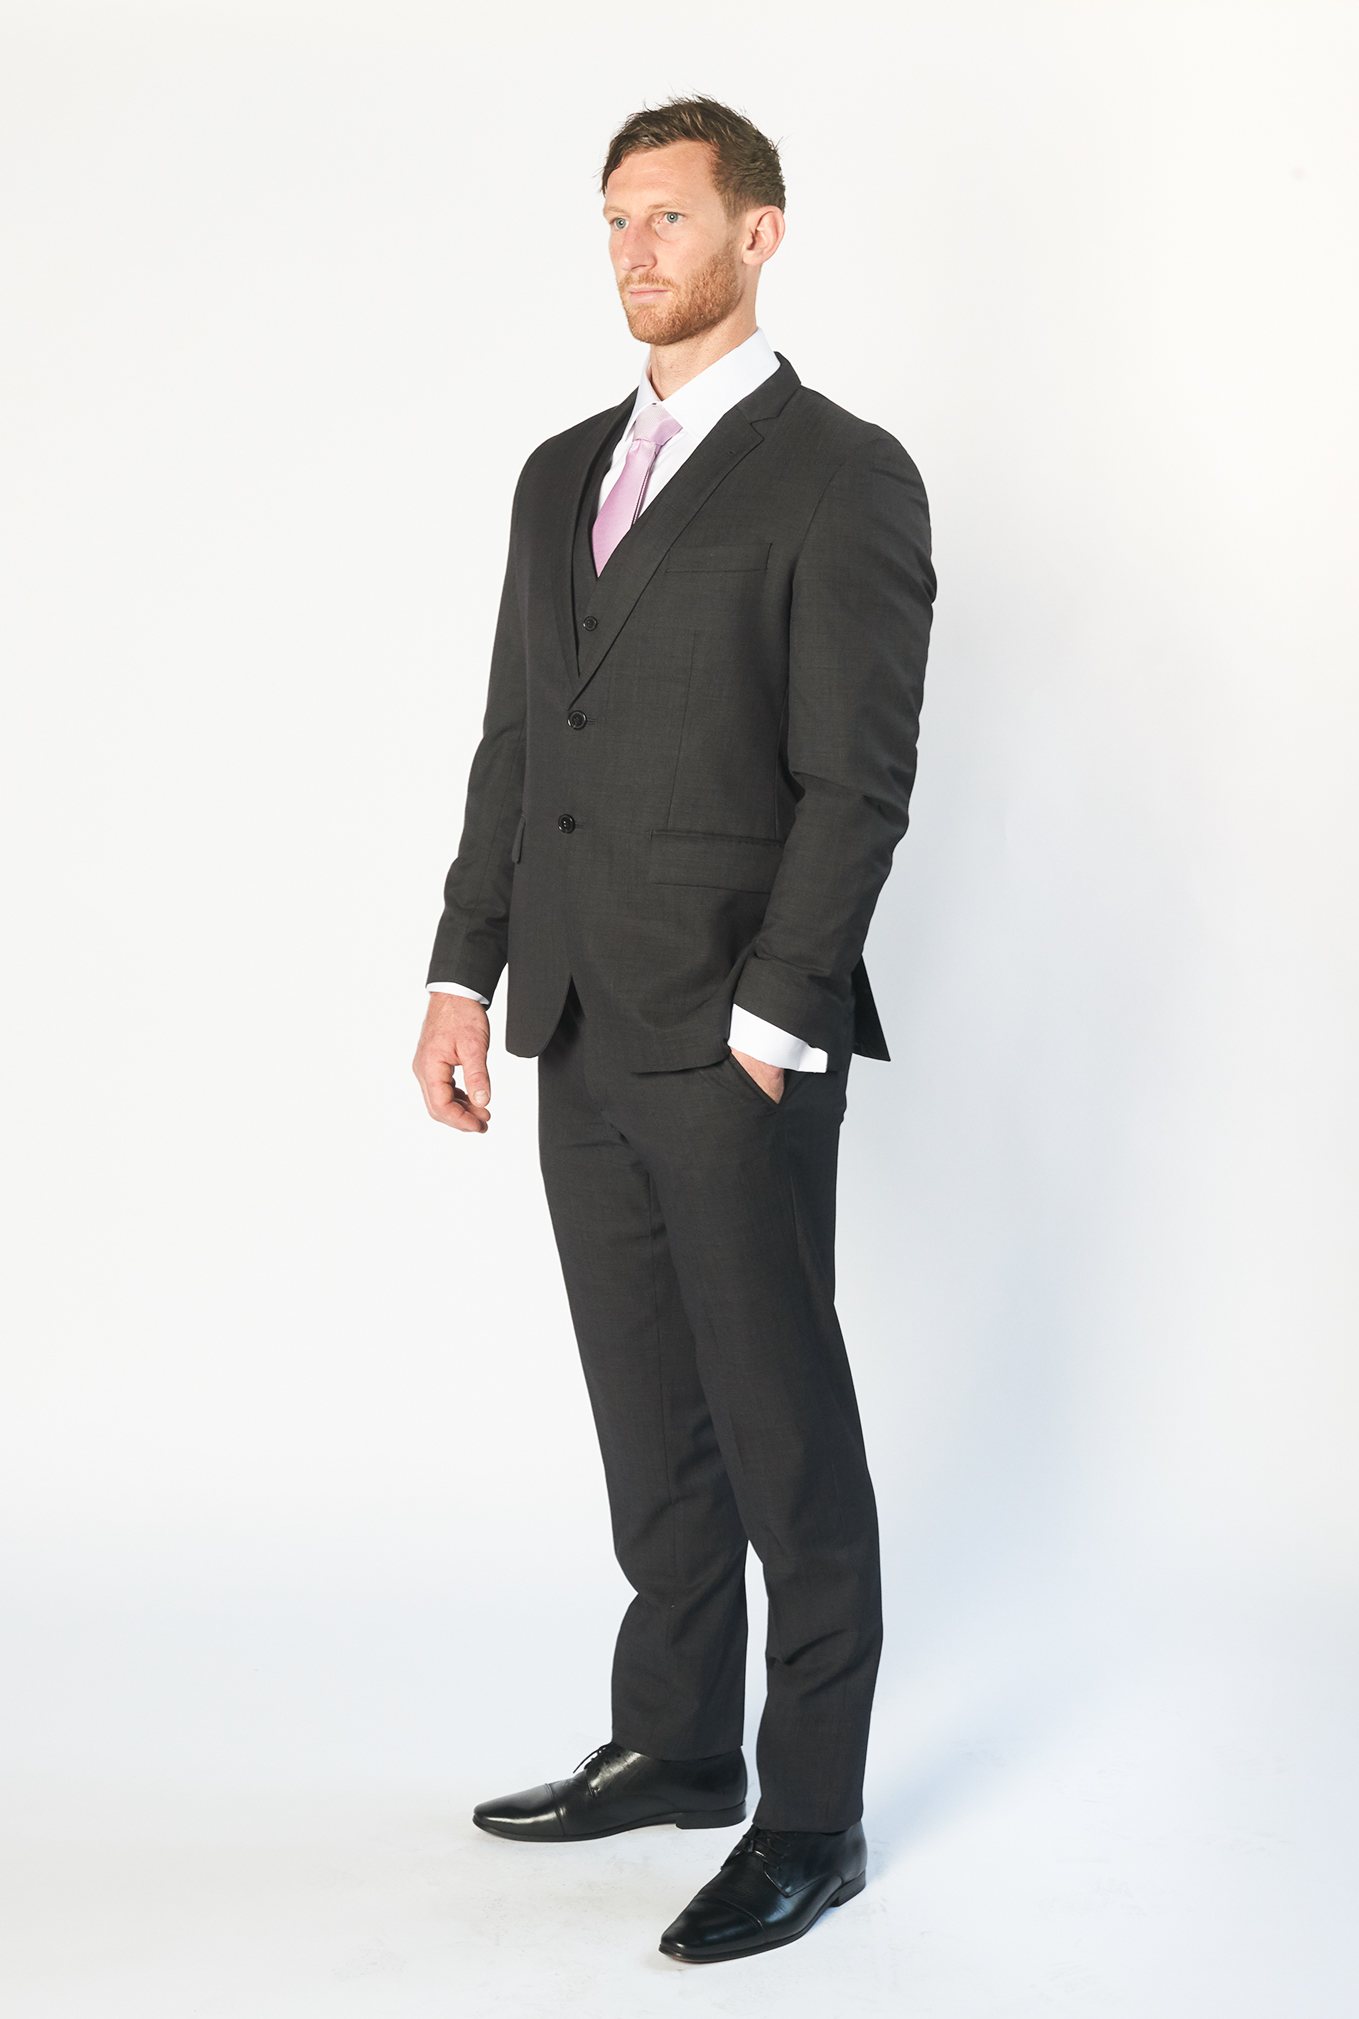 charcoal grey suit and pants for hire brittons formal wear